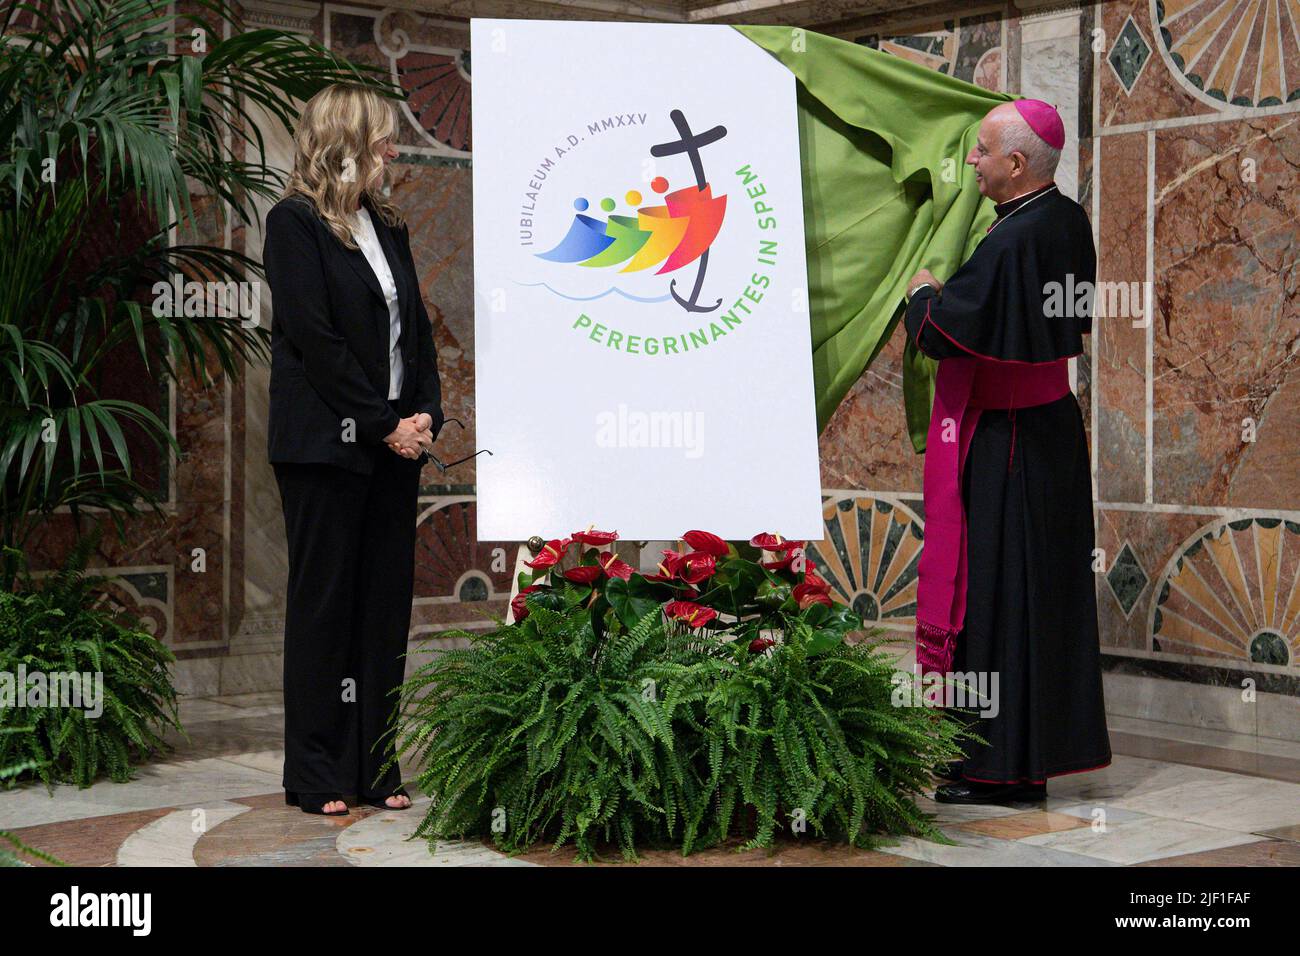 Vatican City, Vatican. 28 June 2022. Monsignor Rino Fisichella (R) Pro-prefect of the Dicastery for Evangelization,  unveils the logo of the Jubilee 2025, MMXXV Pilgrims of Hope, during its presentation at the Regia Hall of the Apostolic Palace. (Photo by Vatican Media). Credit: Vatican Media/Picciarella/Alamy Live News Stock Photo